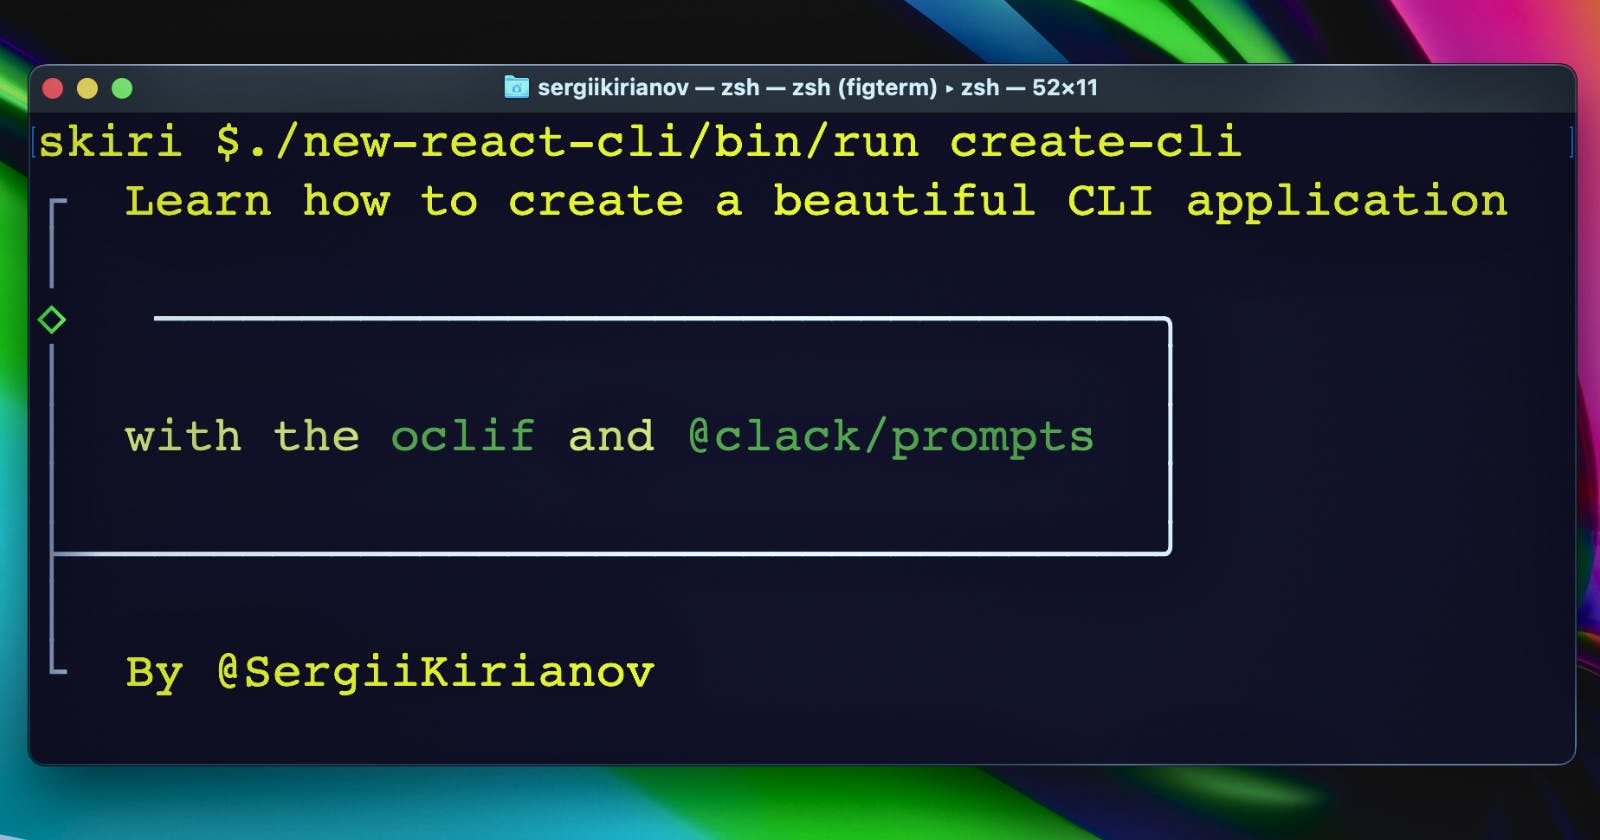 Learn how to create a beautiful CLI application with the oclif and @clack/prompts